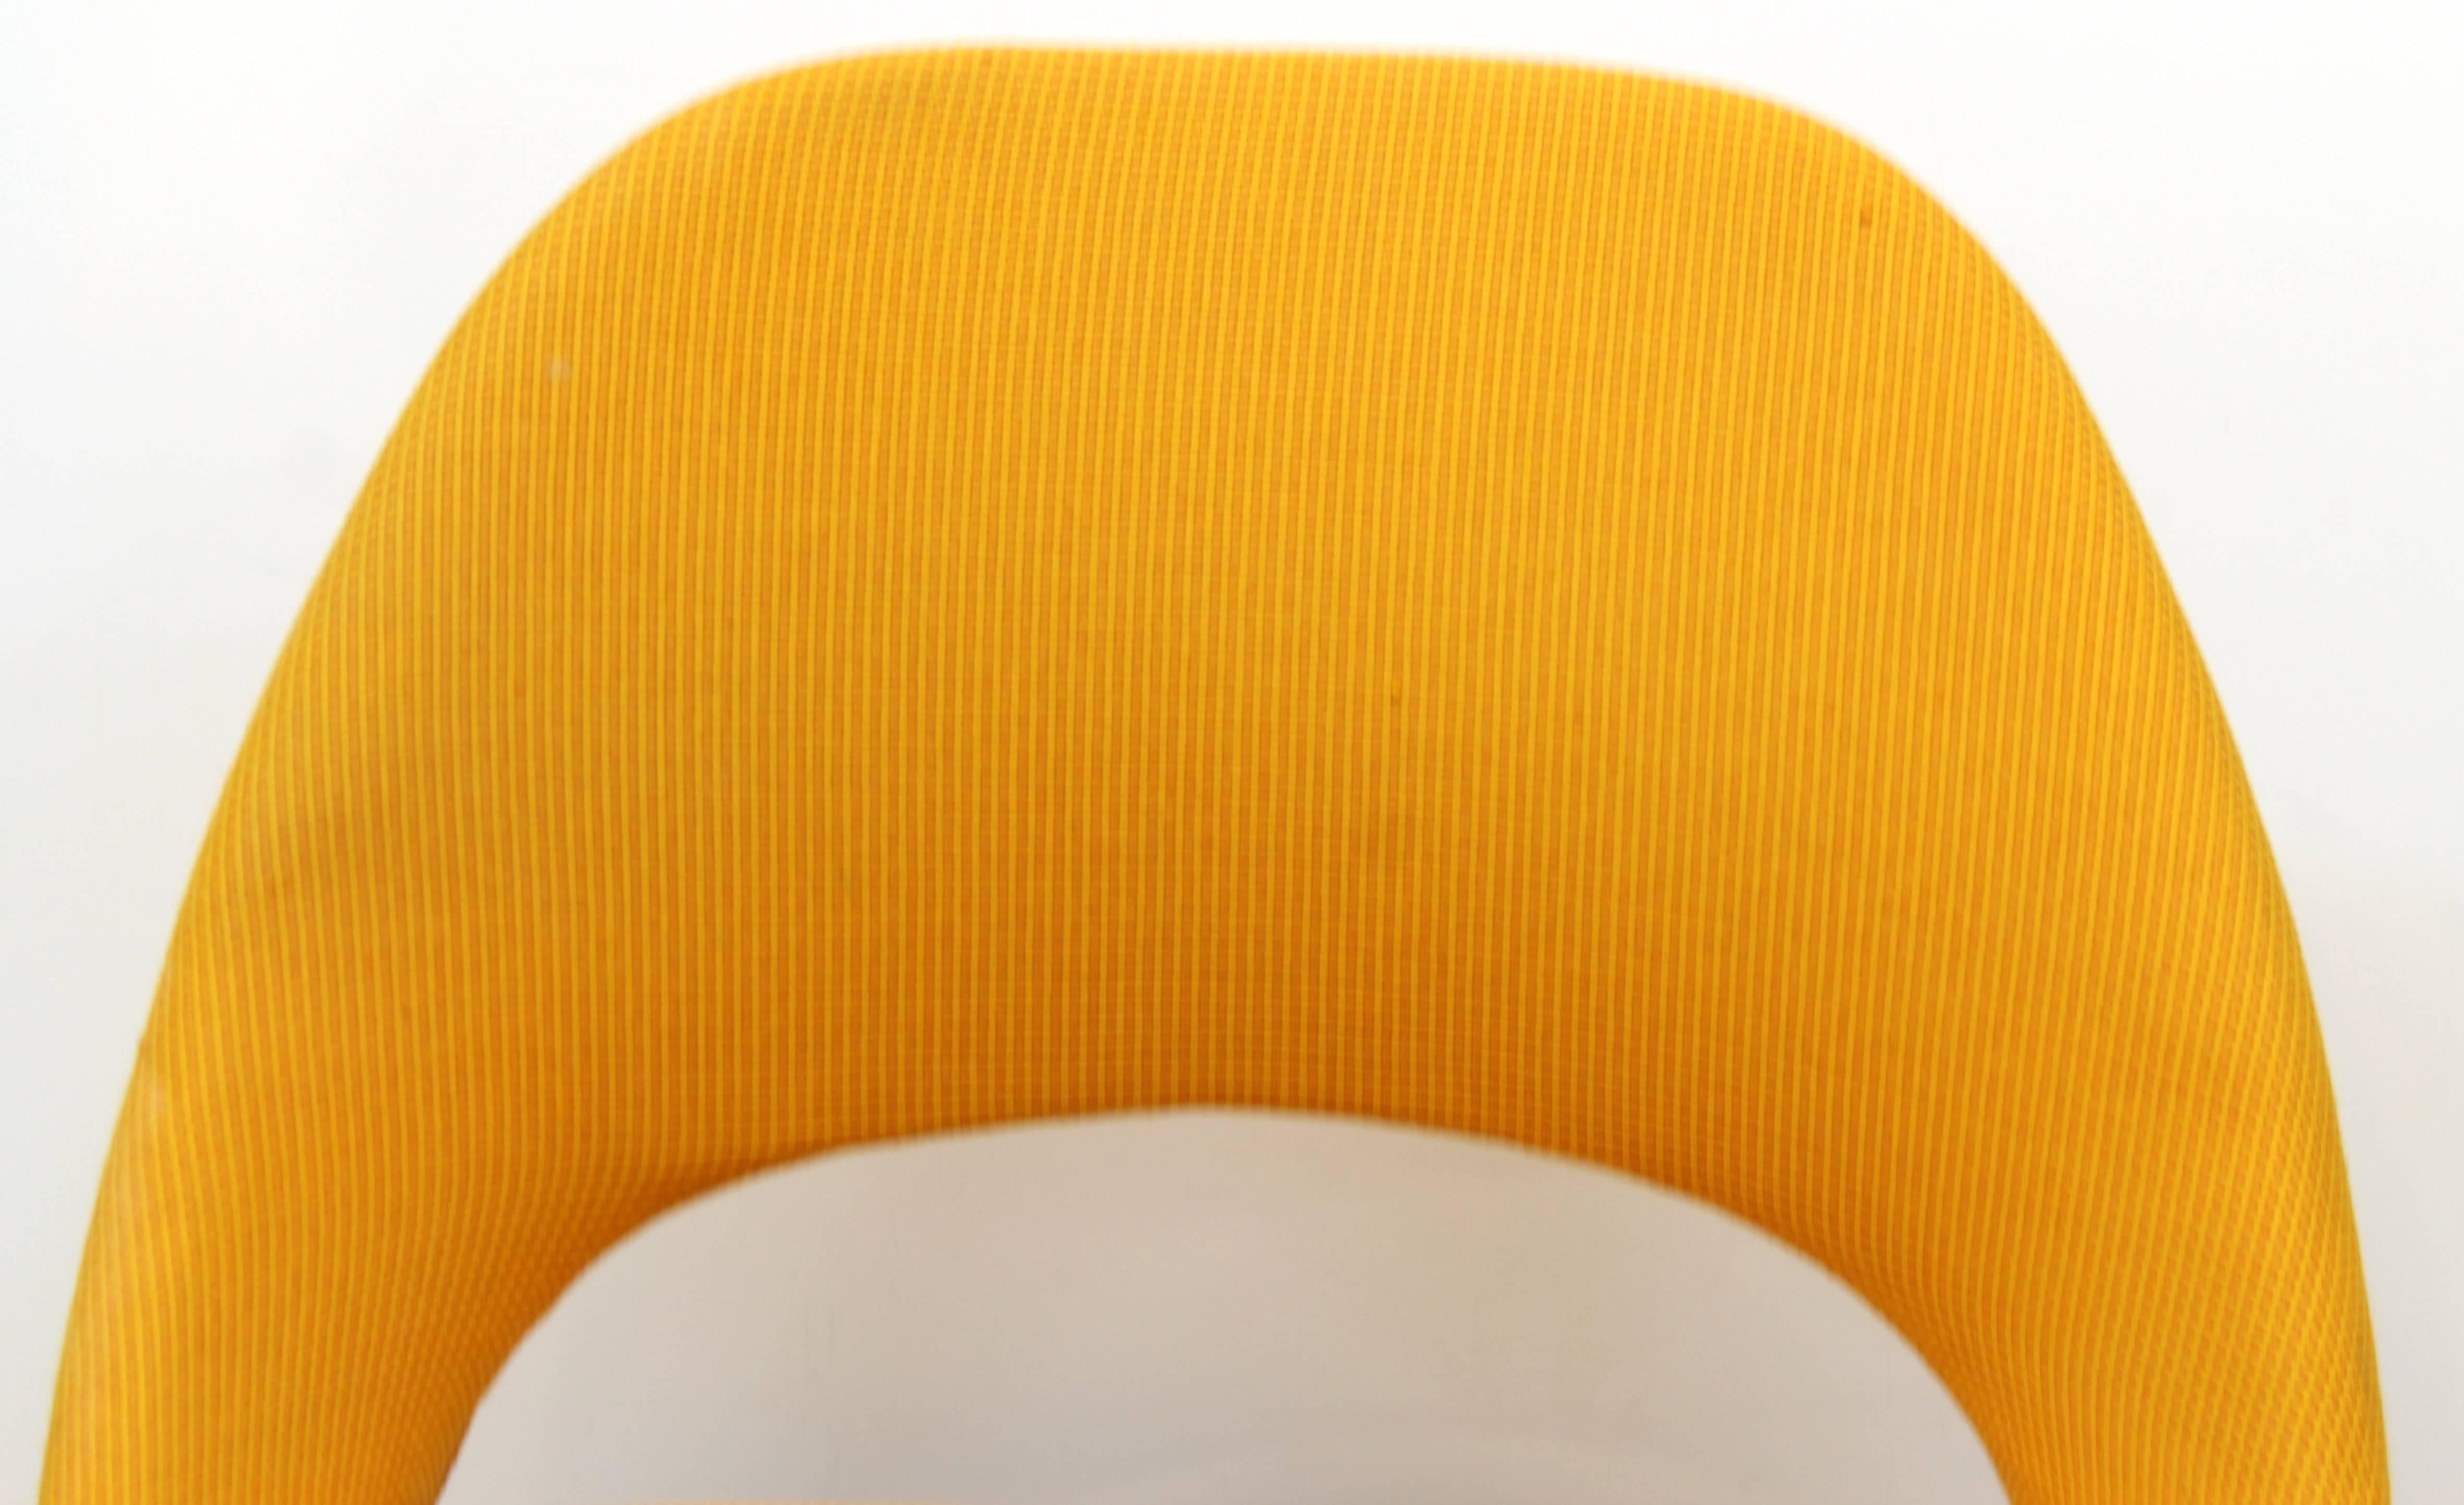 Swivel chairs designed by Eero Saarinen for Knoll international in chrome with a golden yellow upholstery and propeller base. Each chair has the original labels. This pair is in good vintage condition and has wear consistent with age and use.